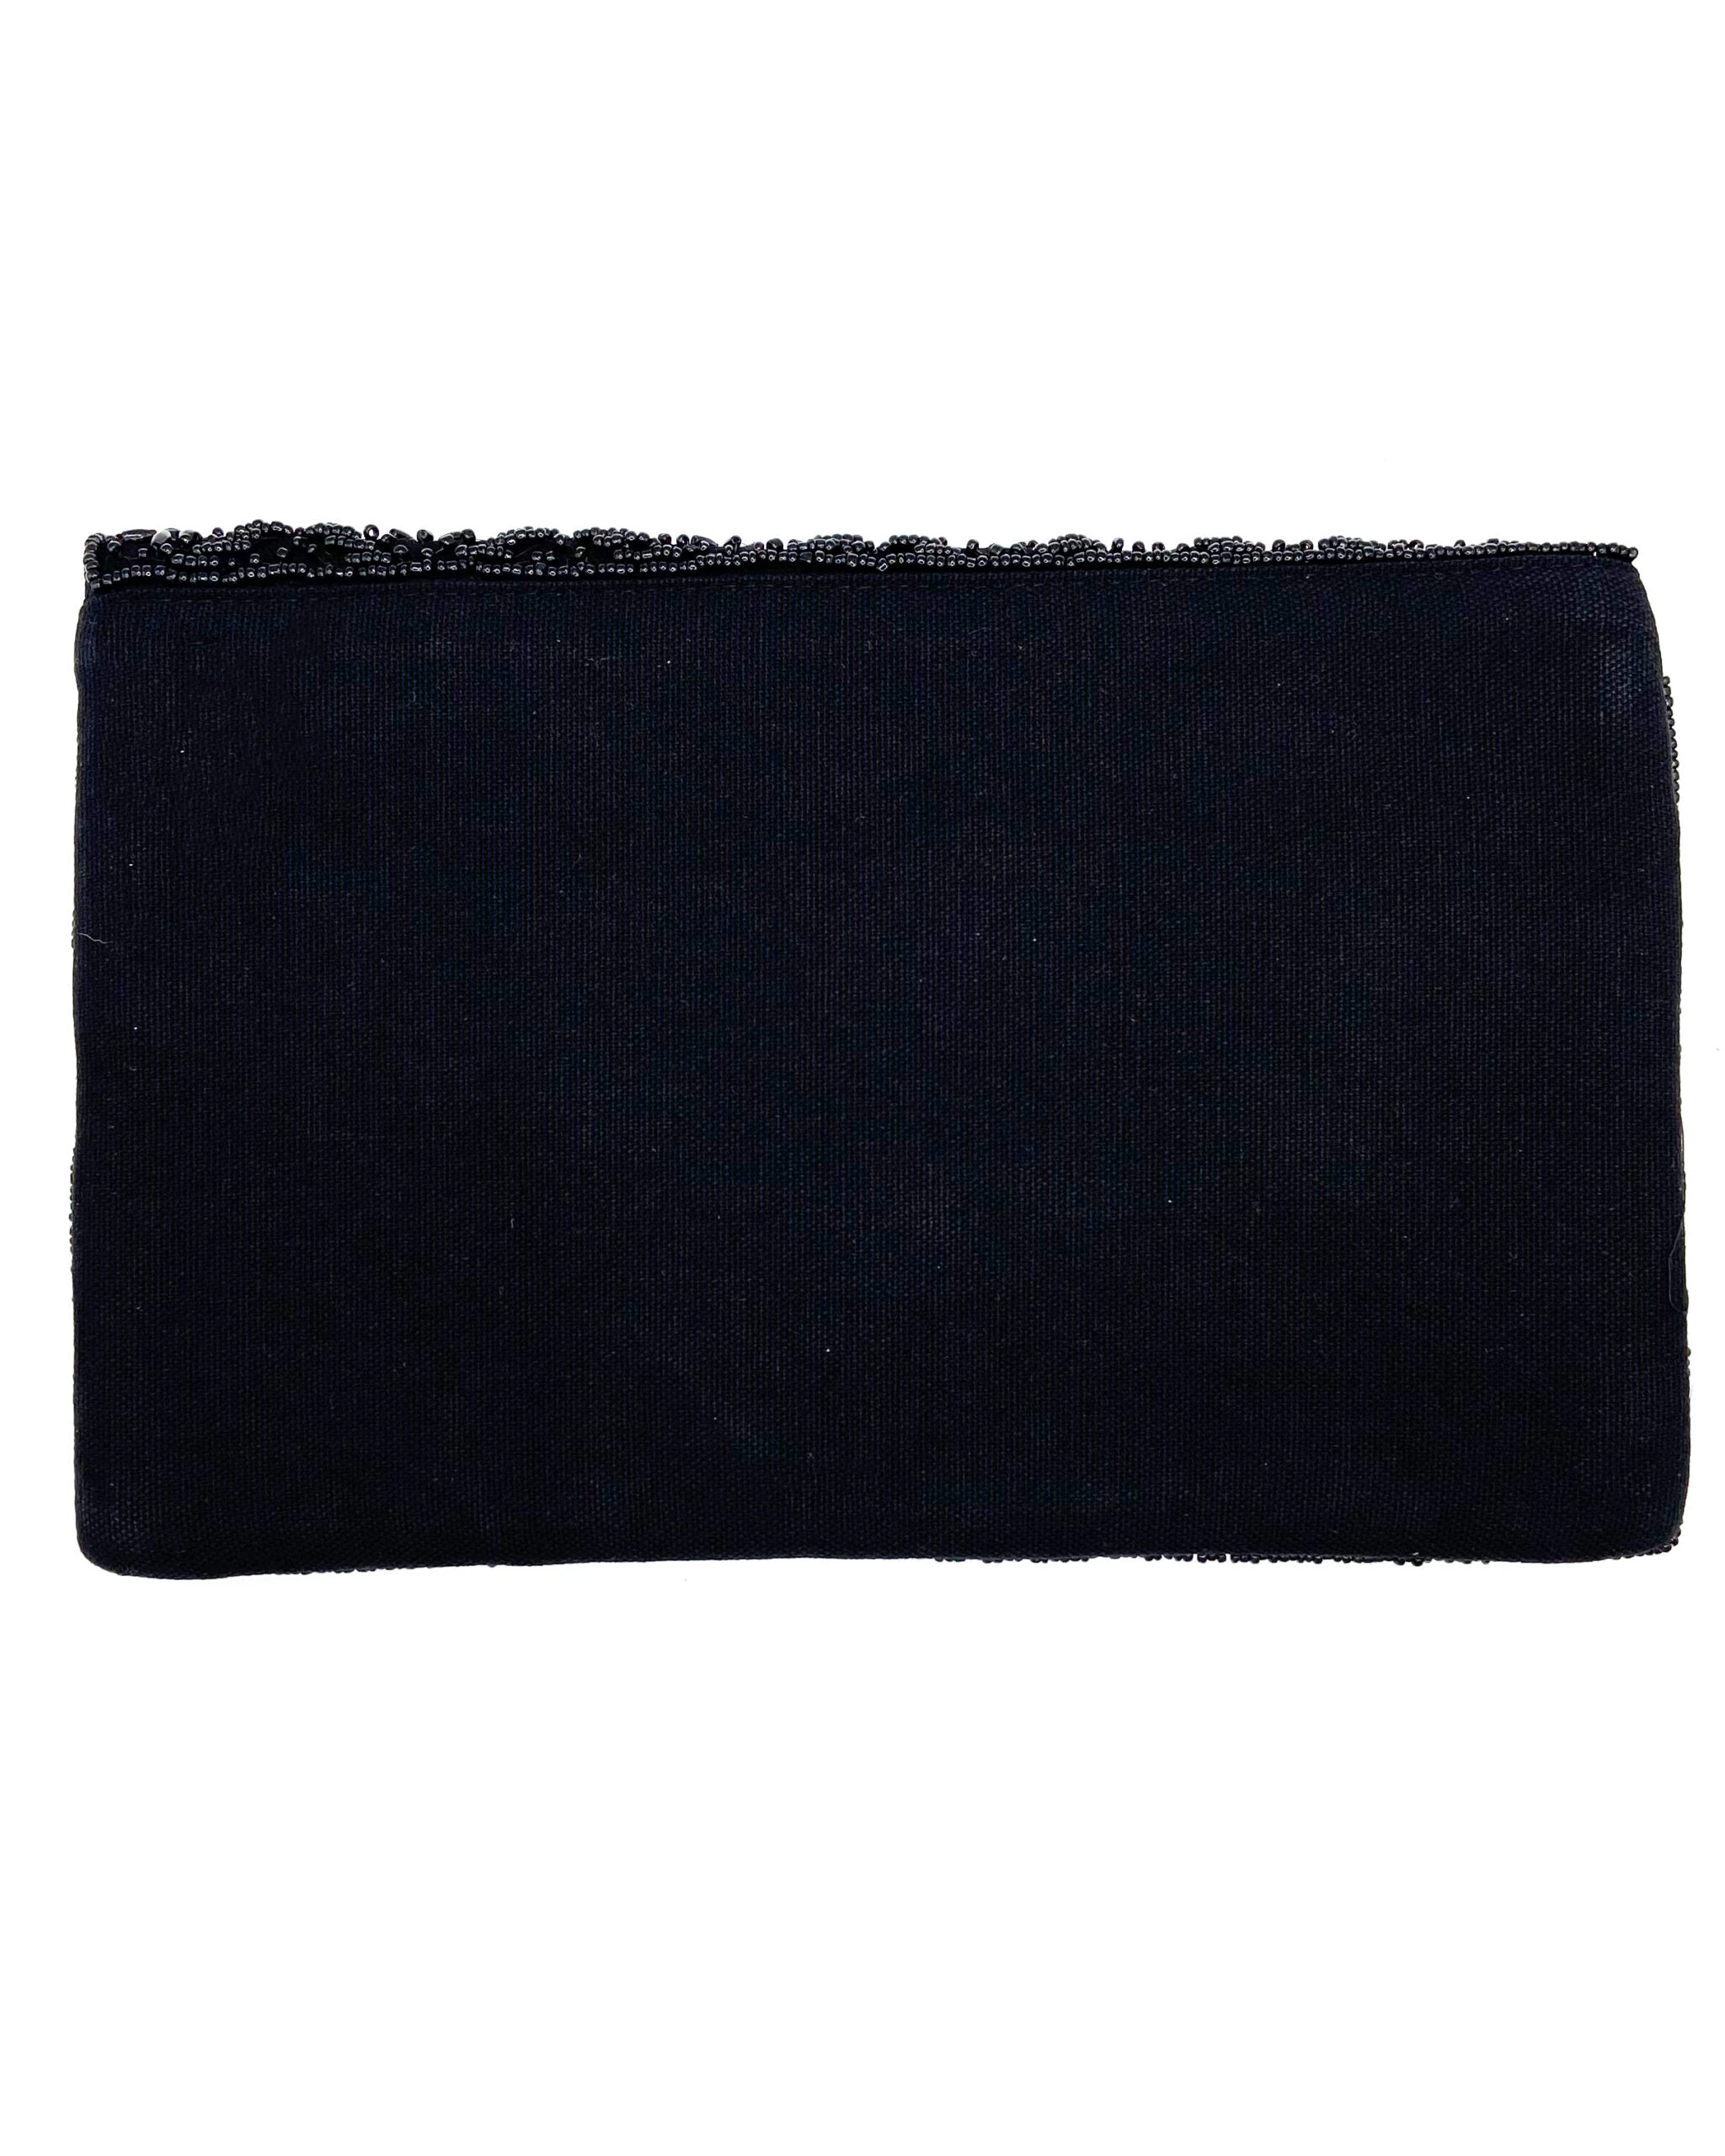 Black Scalloped Beaded Clutch.